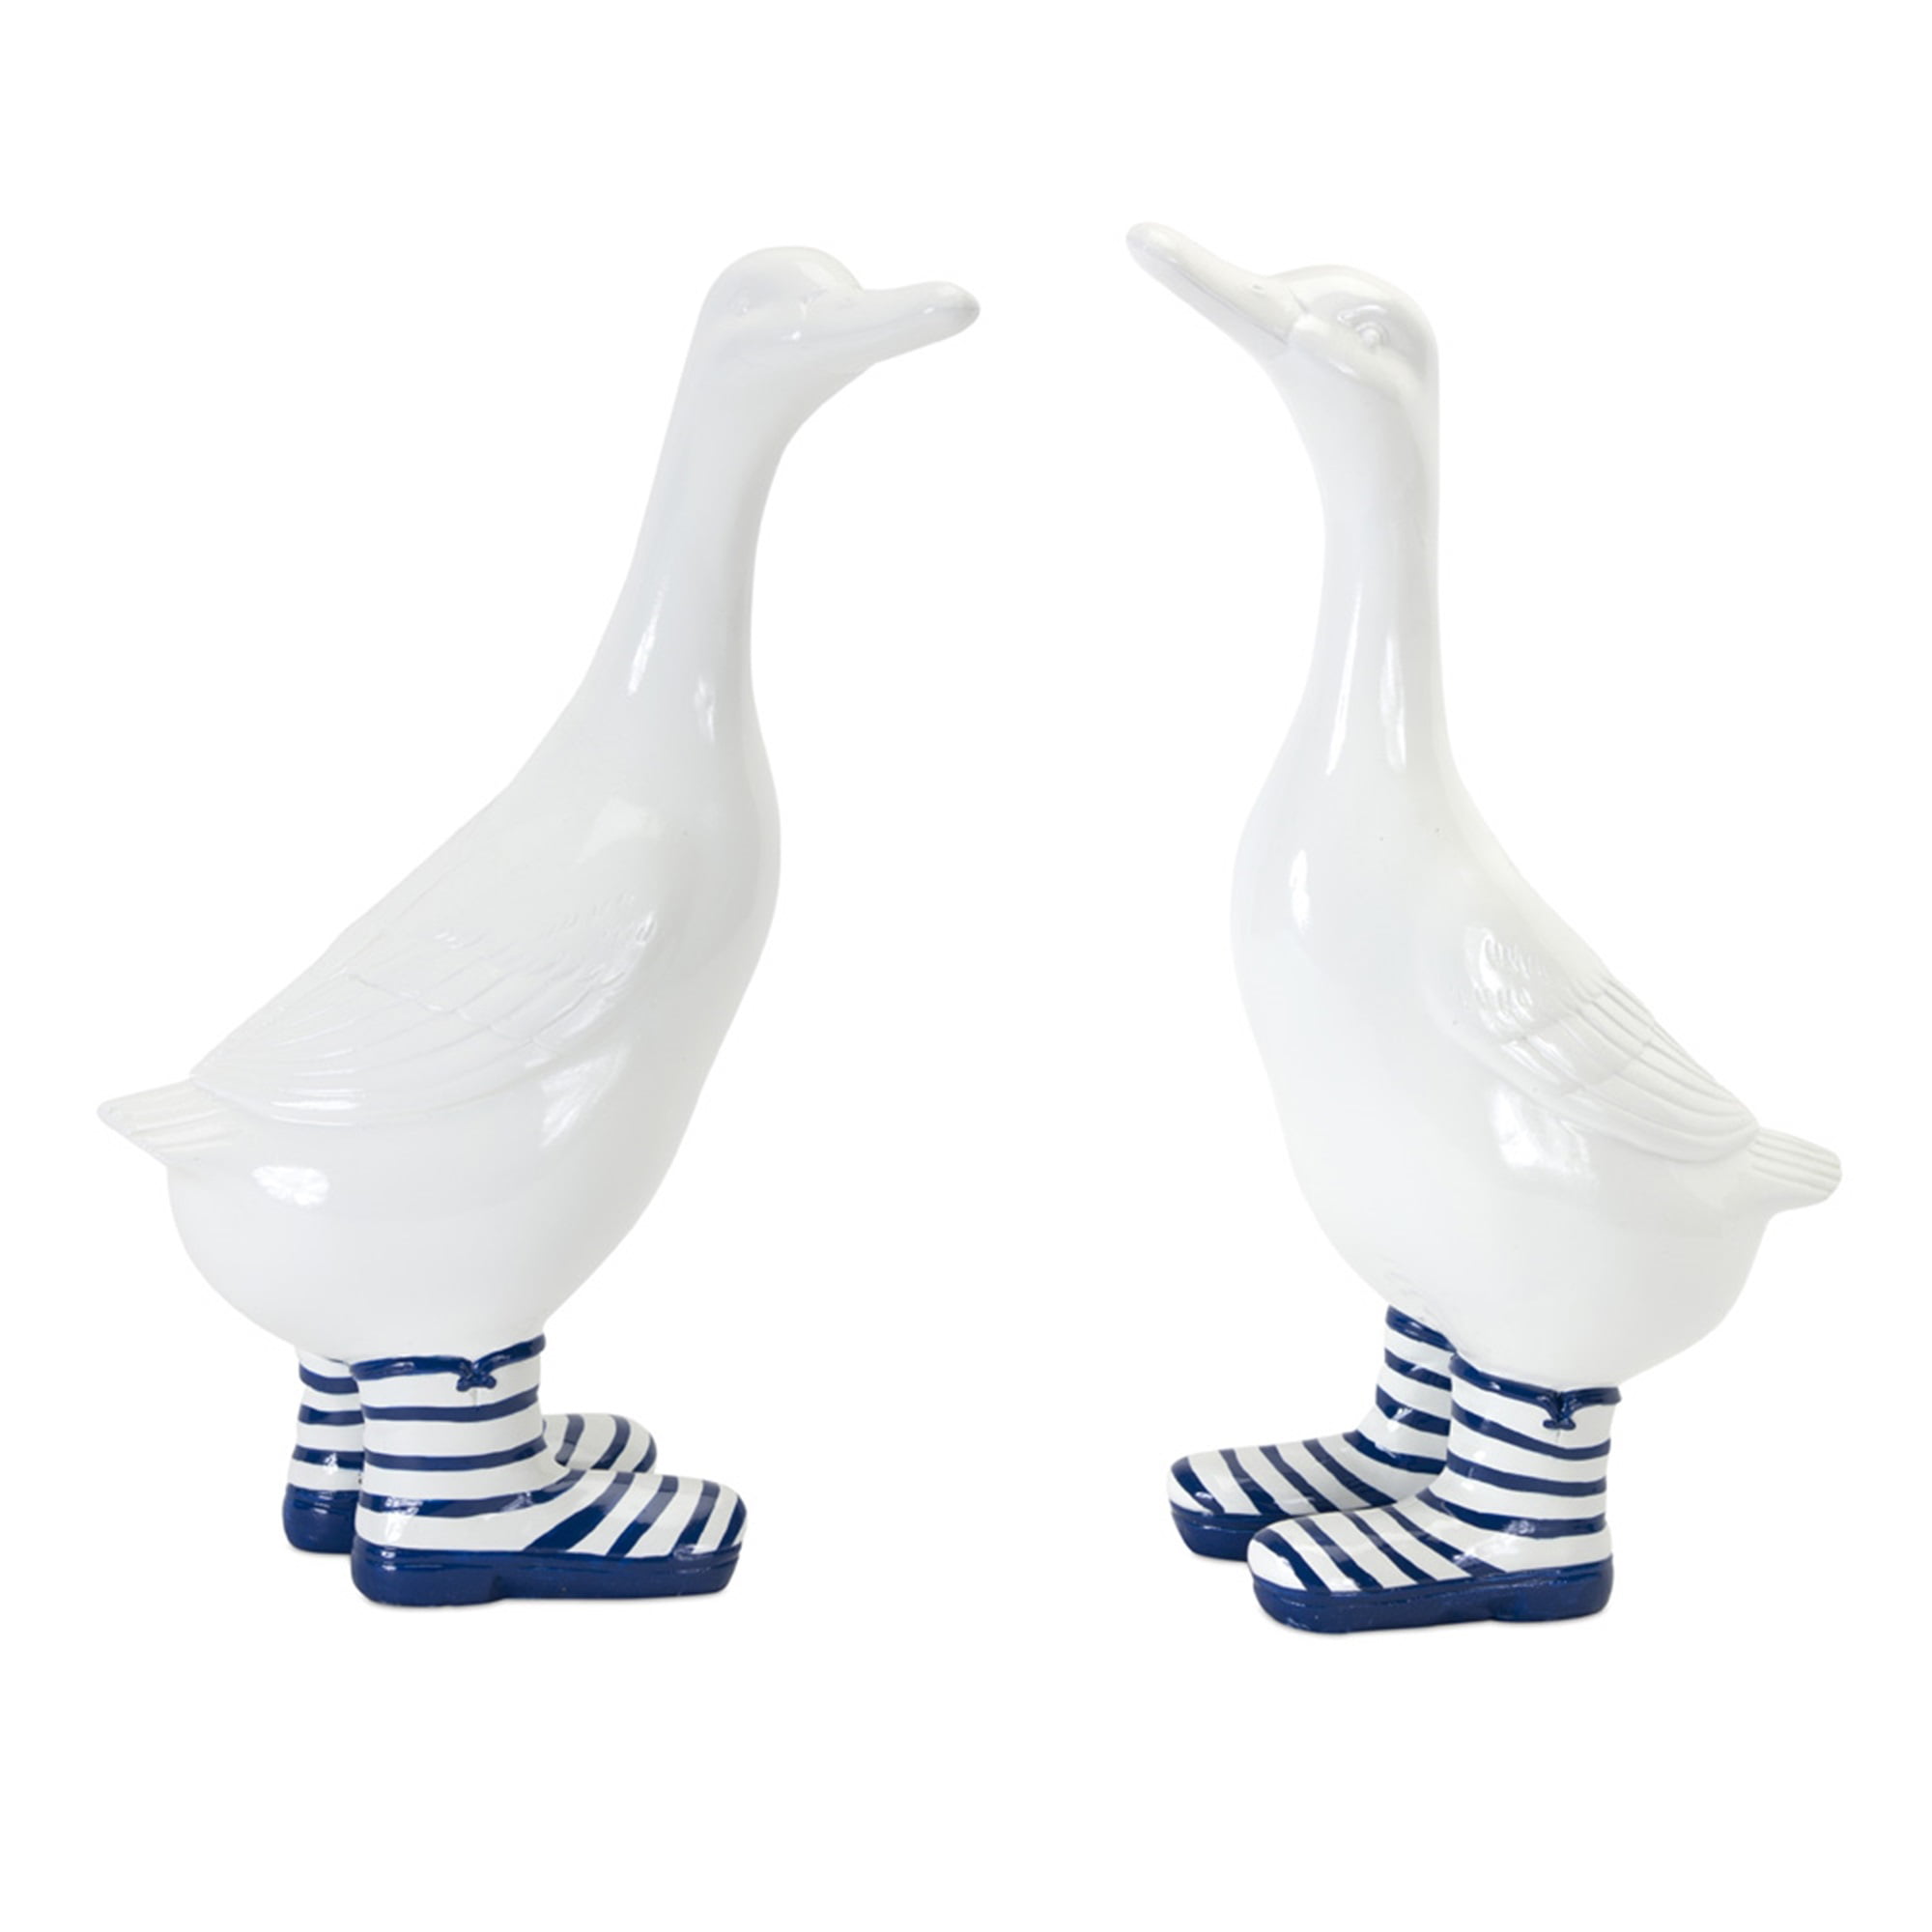 Duck With Boots (Set of 2) 13.5"H, 14"H Resin/Stone Powder